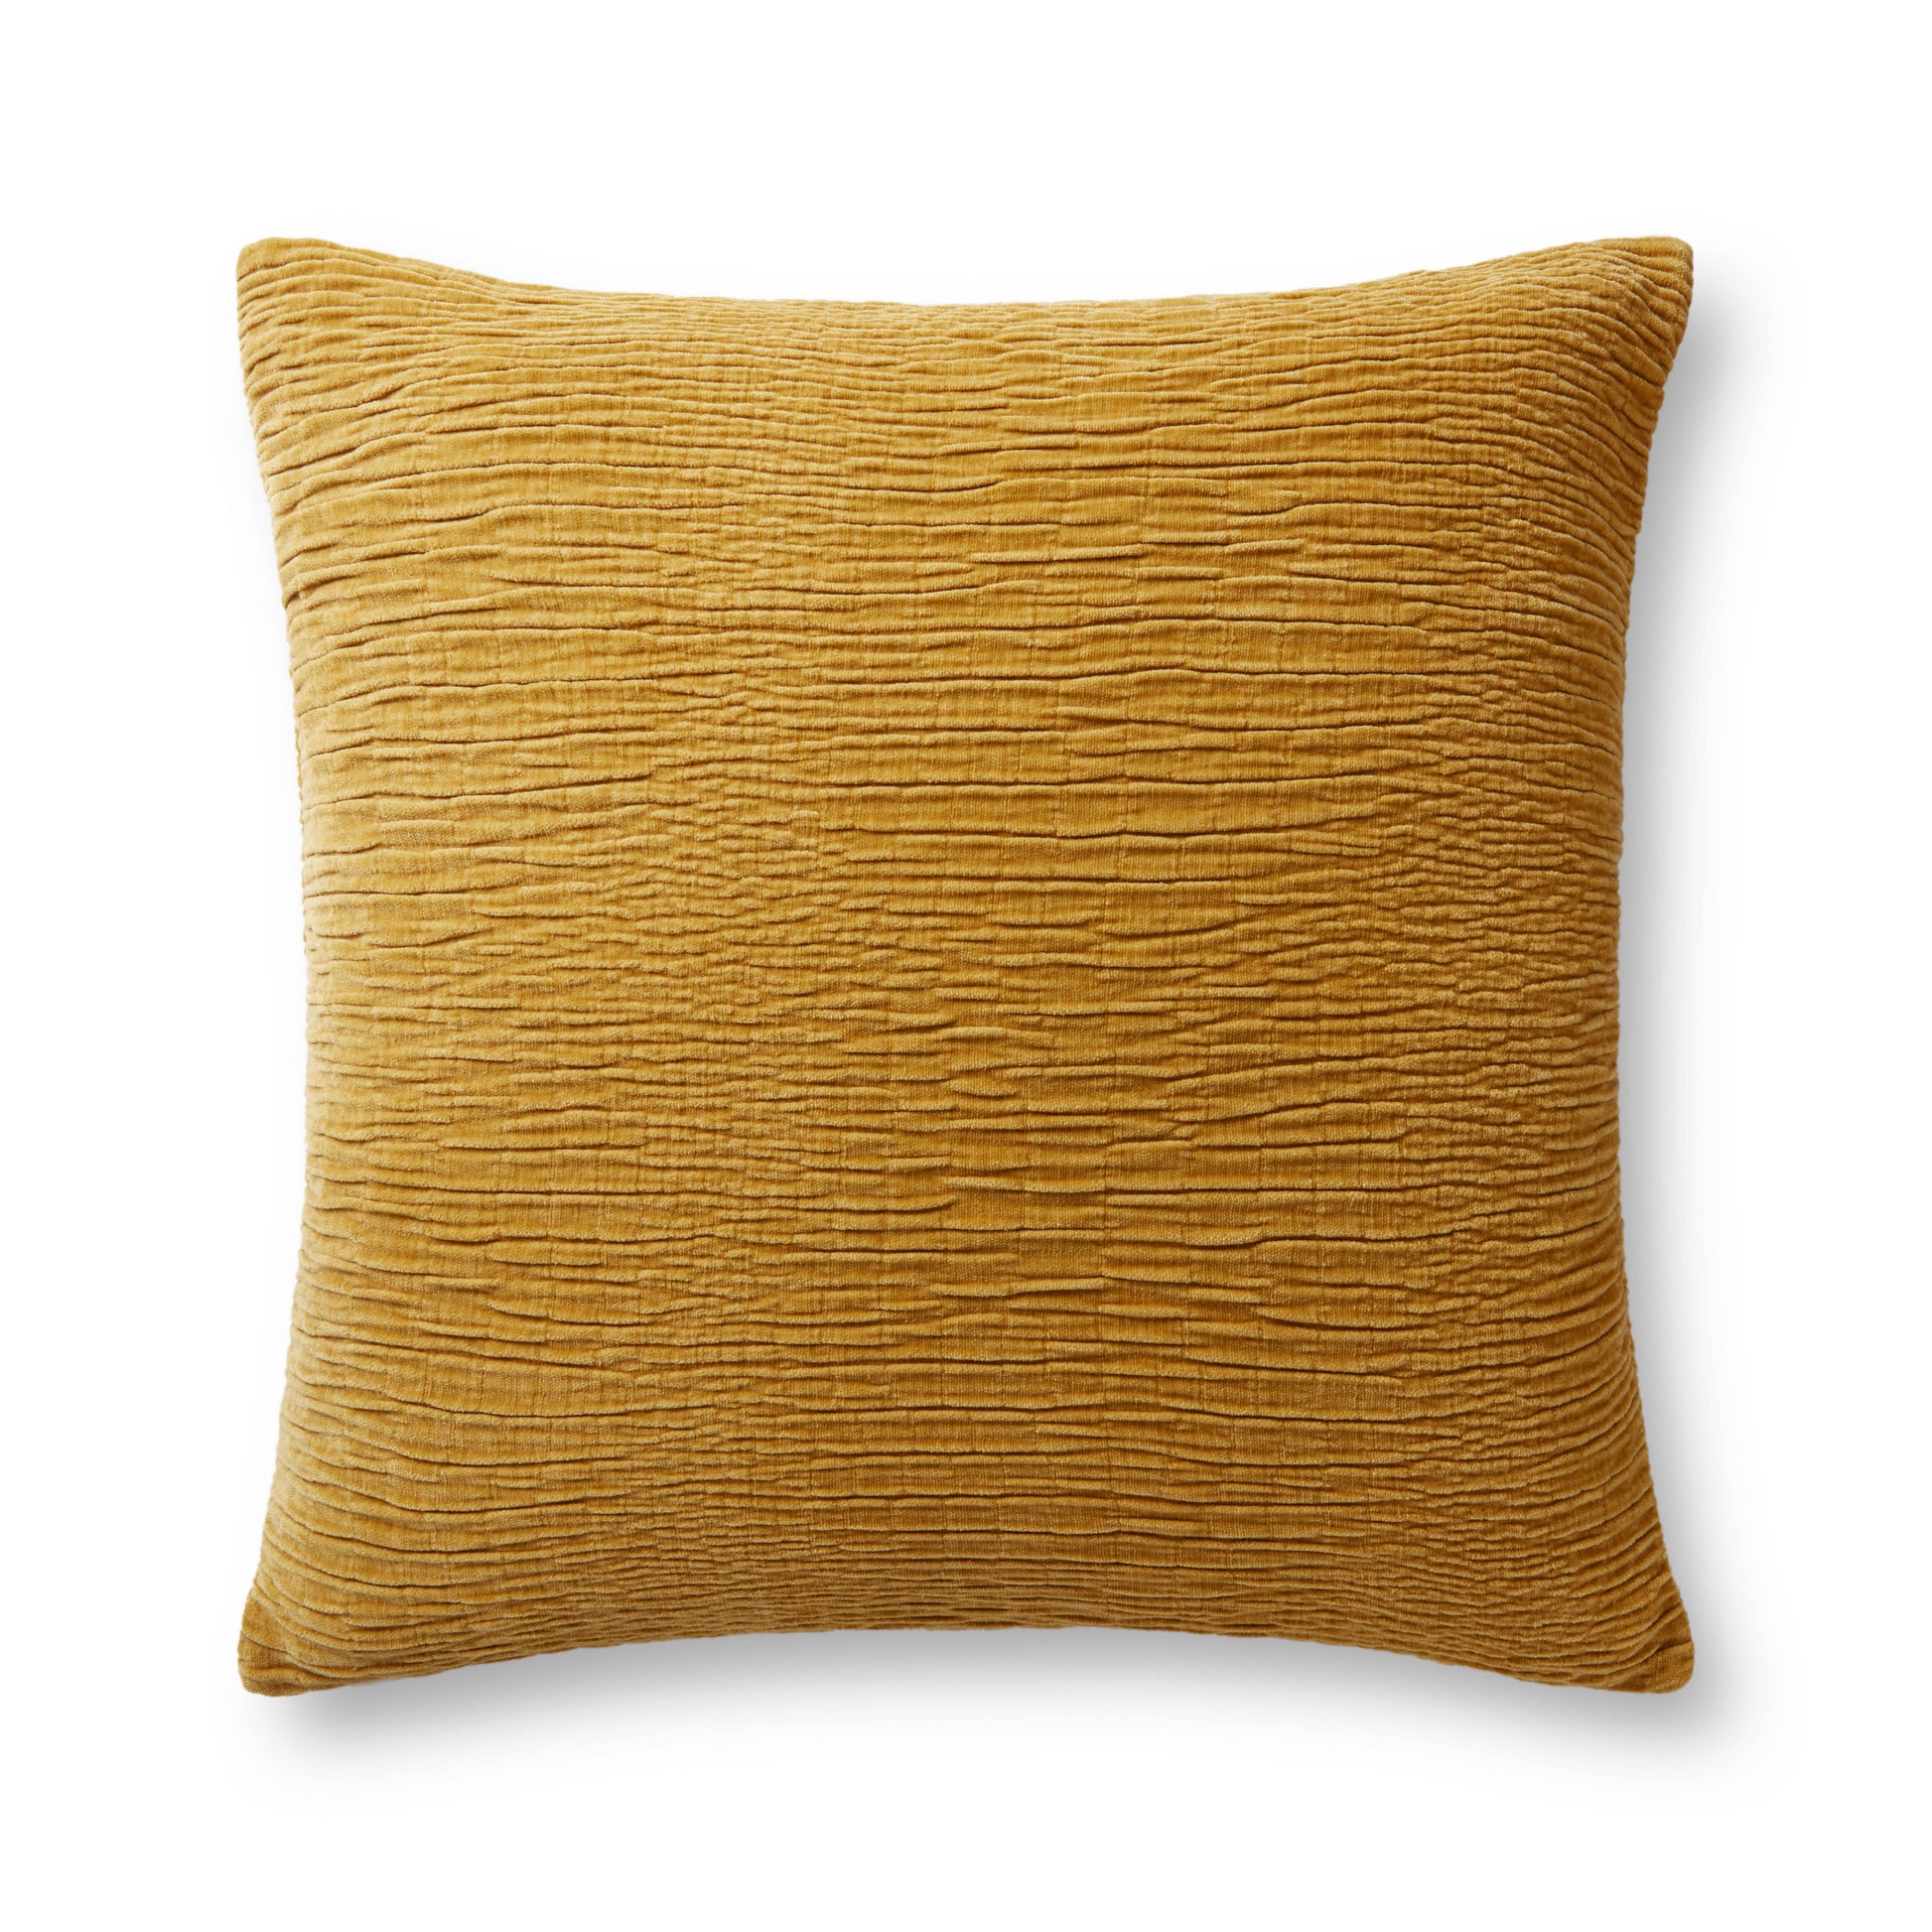 Photo of a pillow;  Gold 22'' x 22'' Cover w/Poly Pillow